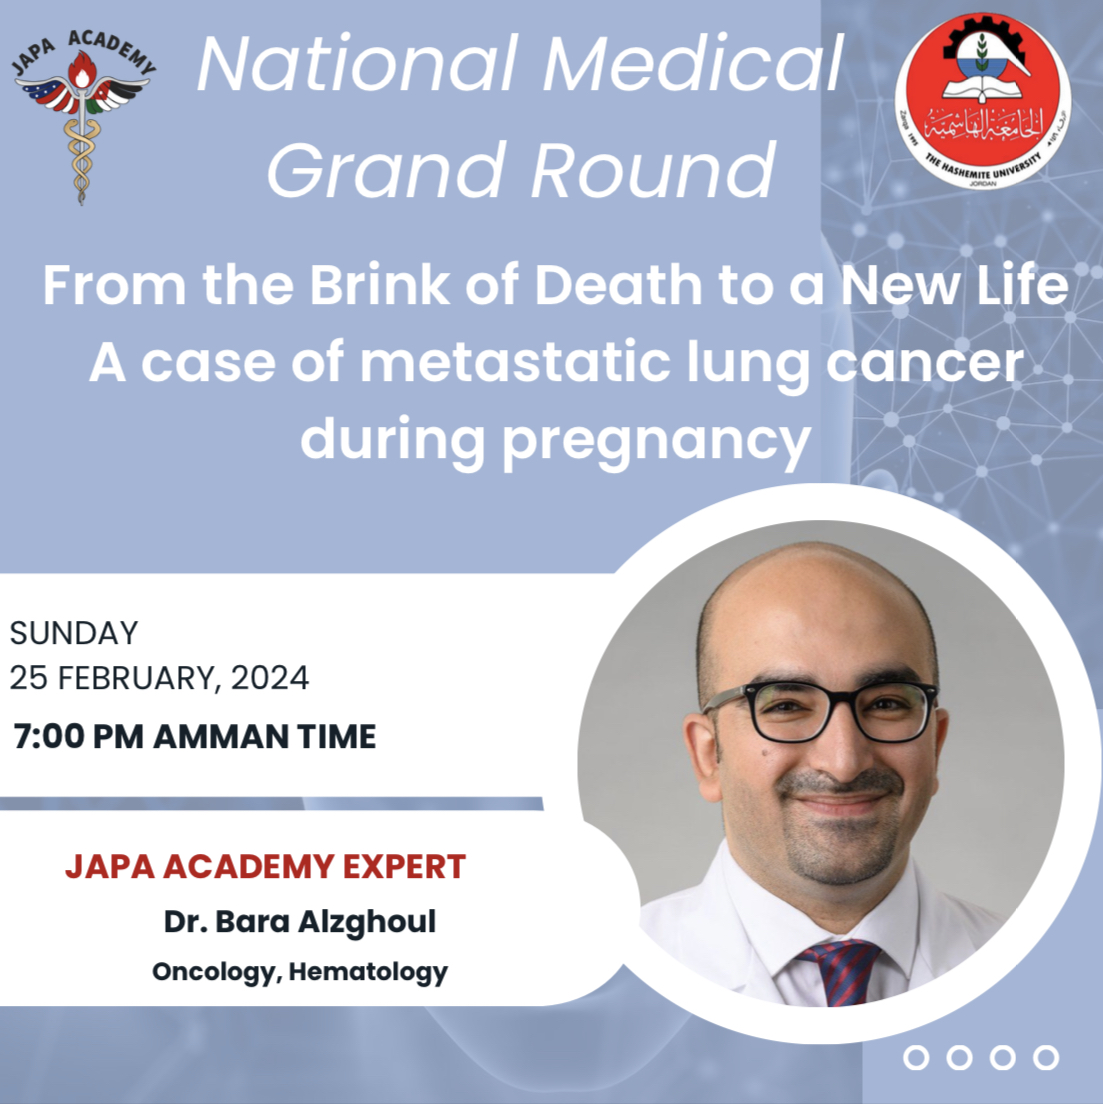 National medical grand round: From the brink of death to a new life a case of metastatic lung cancer during pregnancy